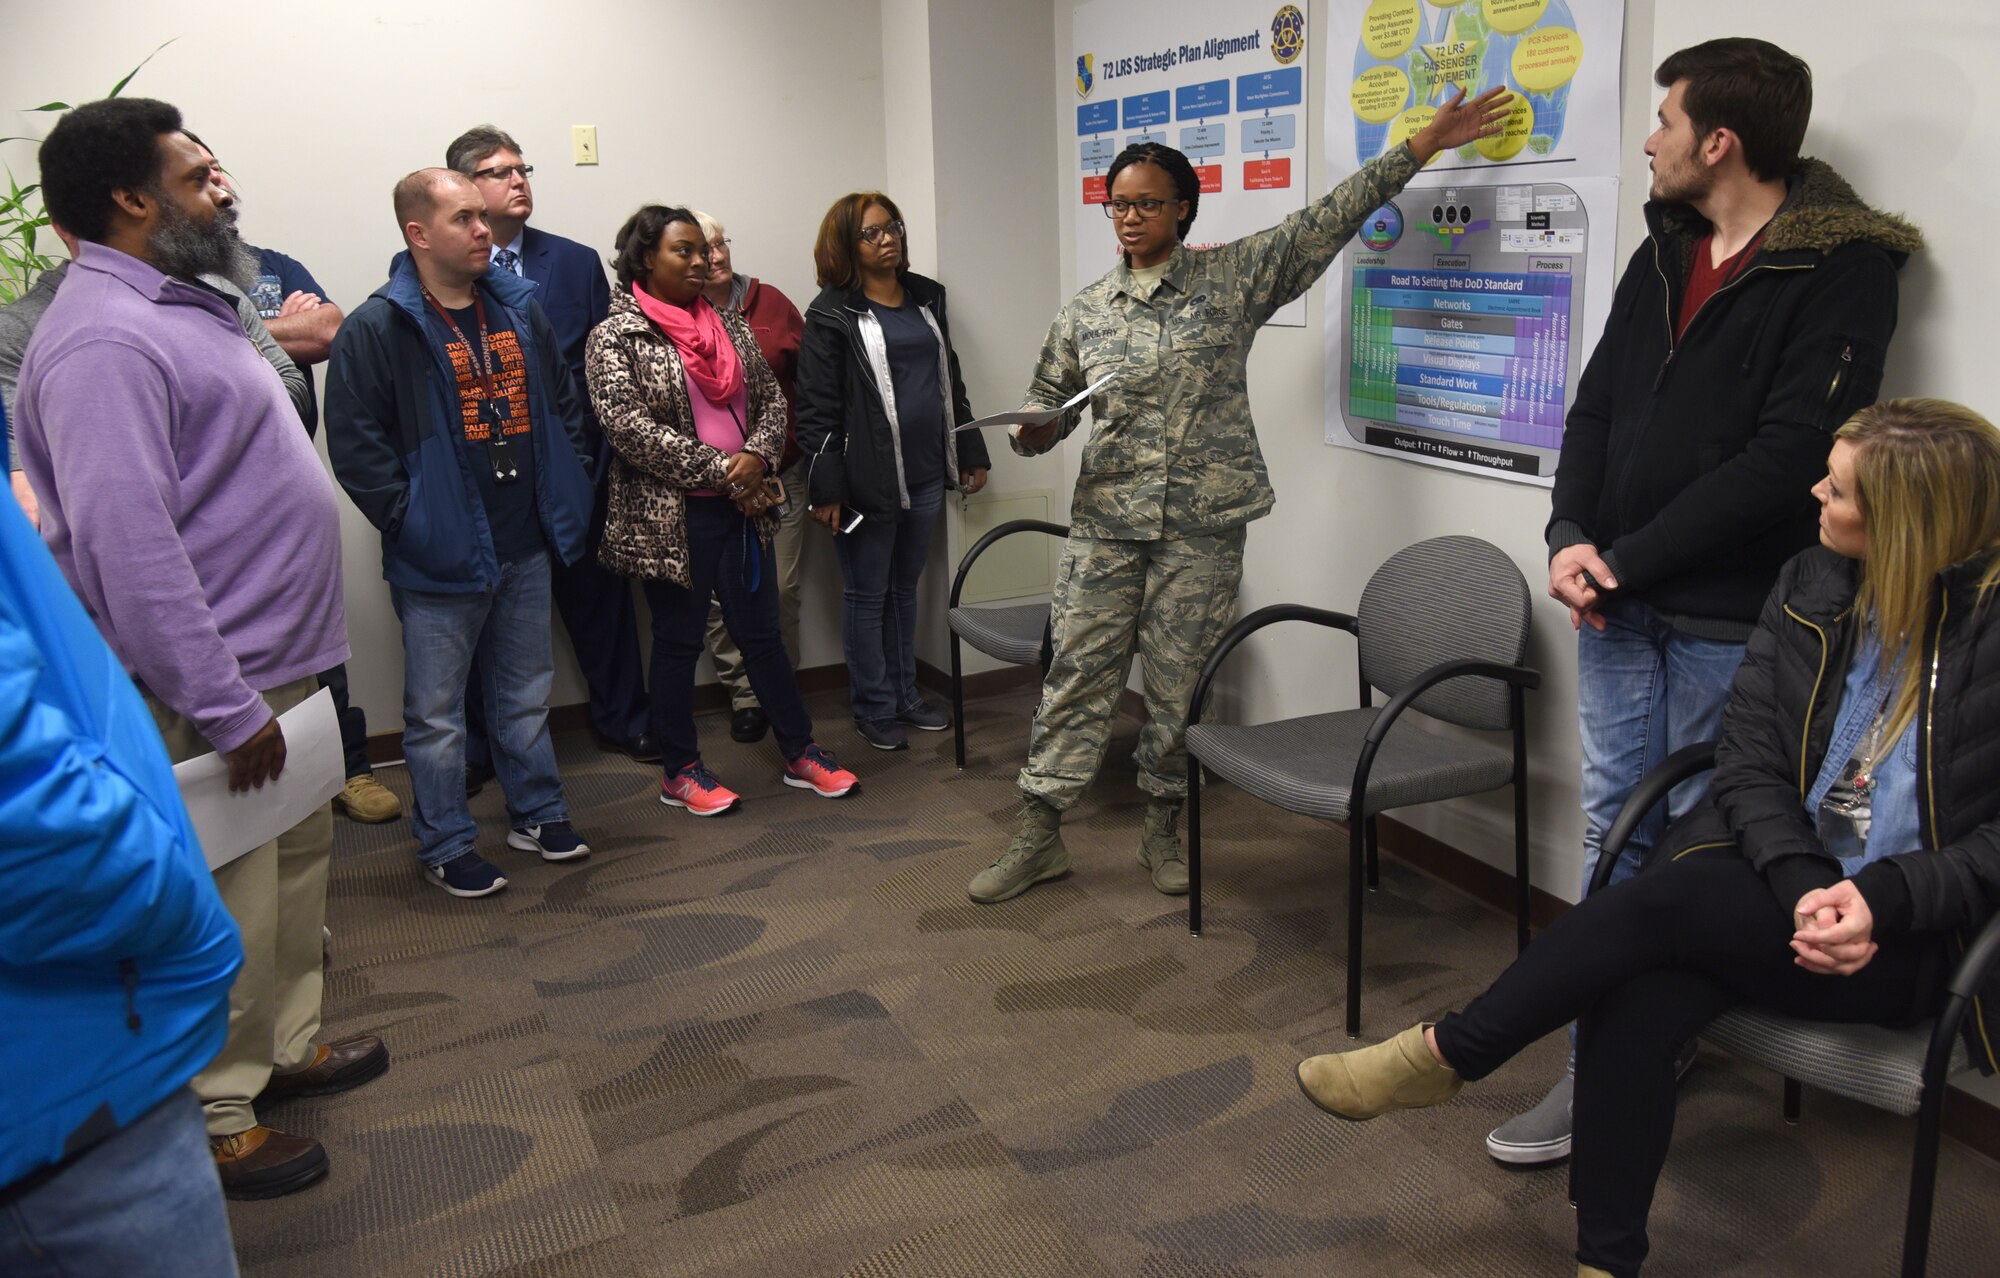 Staff Sgt. Chaelon Moultry, with the 72nd Logistics Readiness Squadron Passenger Movement Office, speaks about how her office helps over 26,000 DoD military and civilians and 18,000 dependents annually. About 30 people from across the base toured various sections of the 72nd Logistics Readiness Squadron as part of an ongoing initiative to showcase various organizations within the 72nd Air Base Wing. (U.S. Air Force photos/Kelly White)